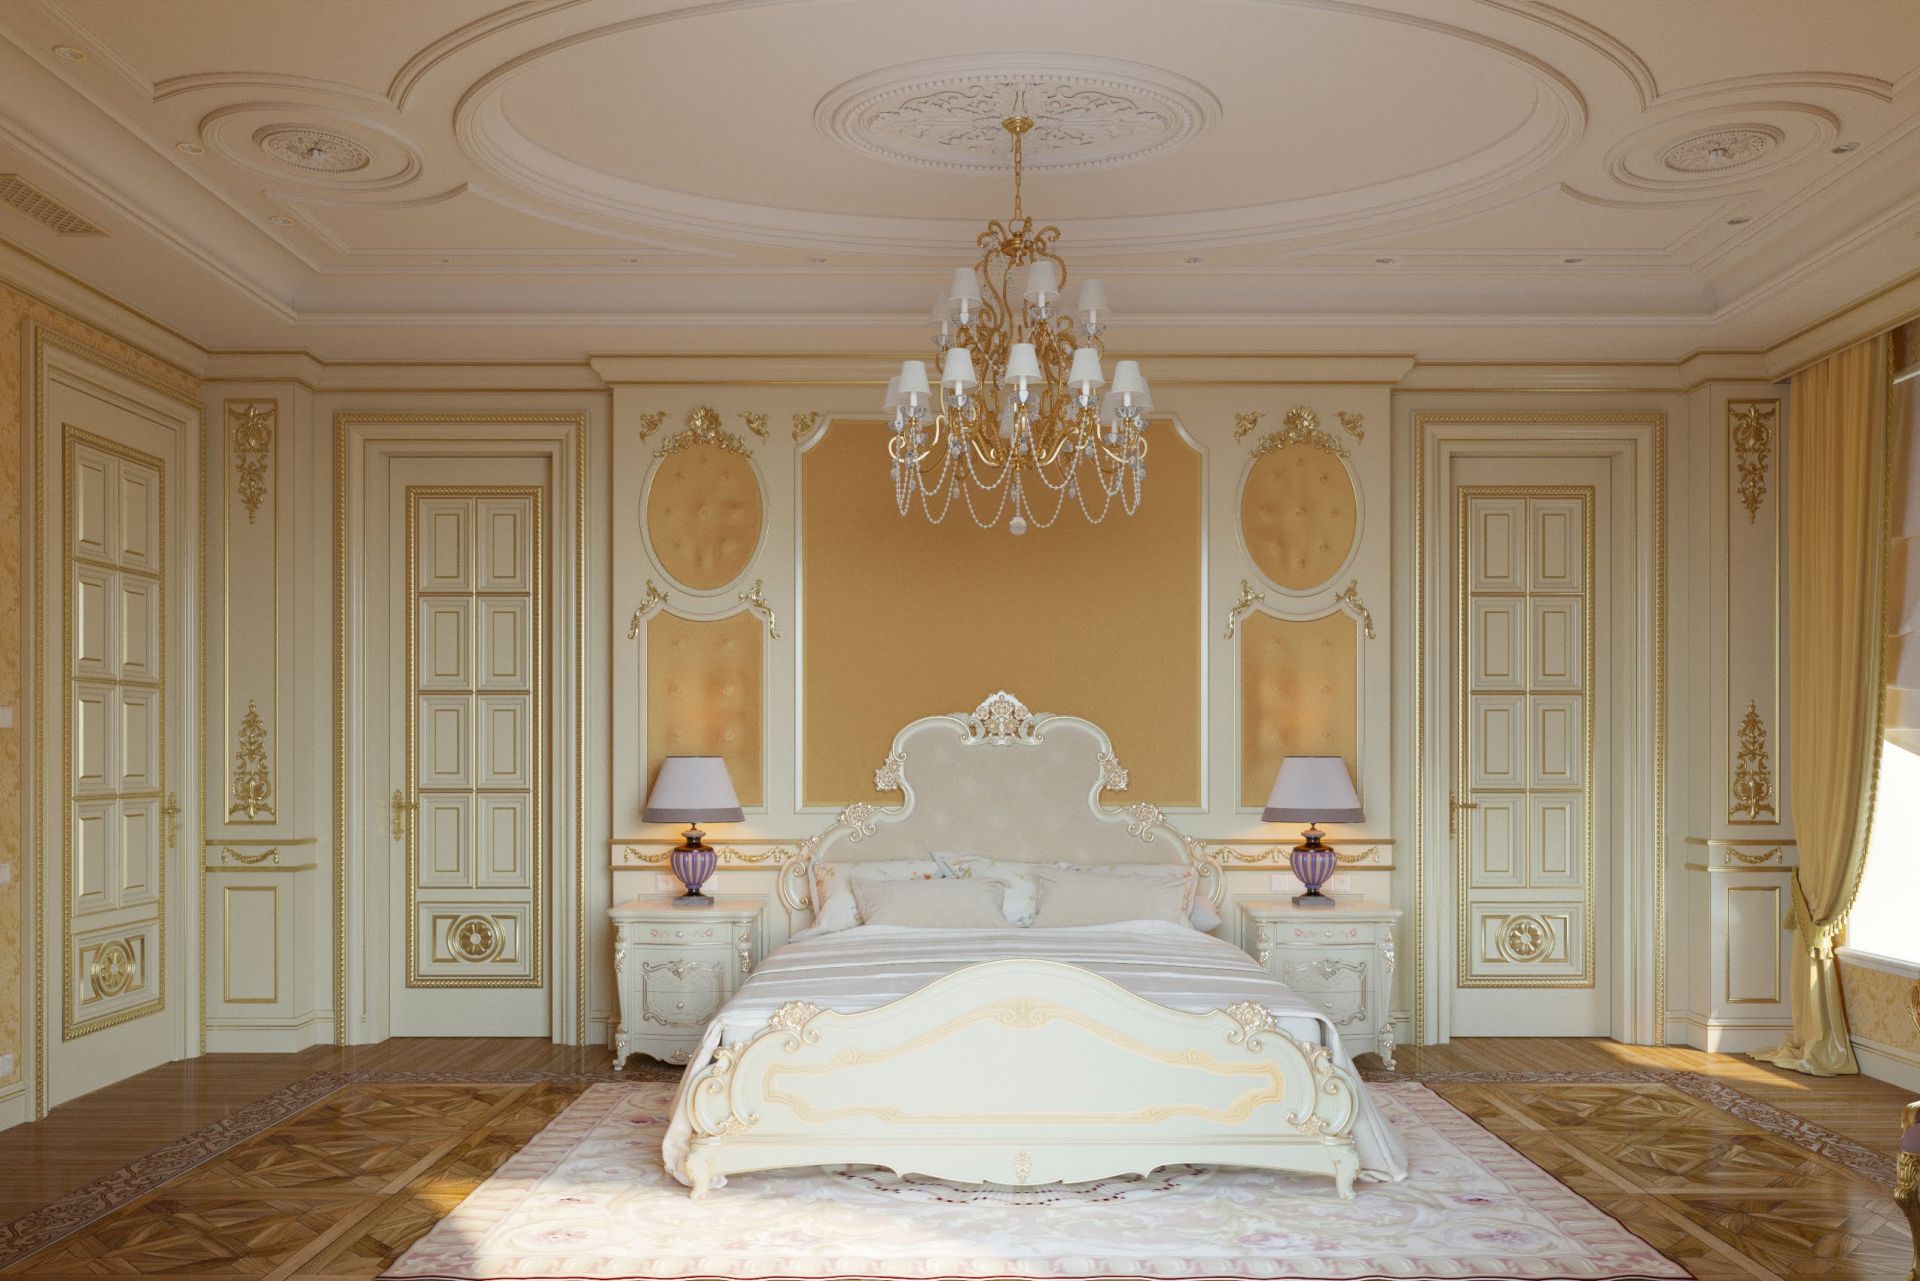 Bedroom in the residence